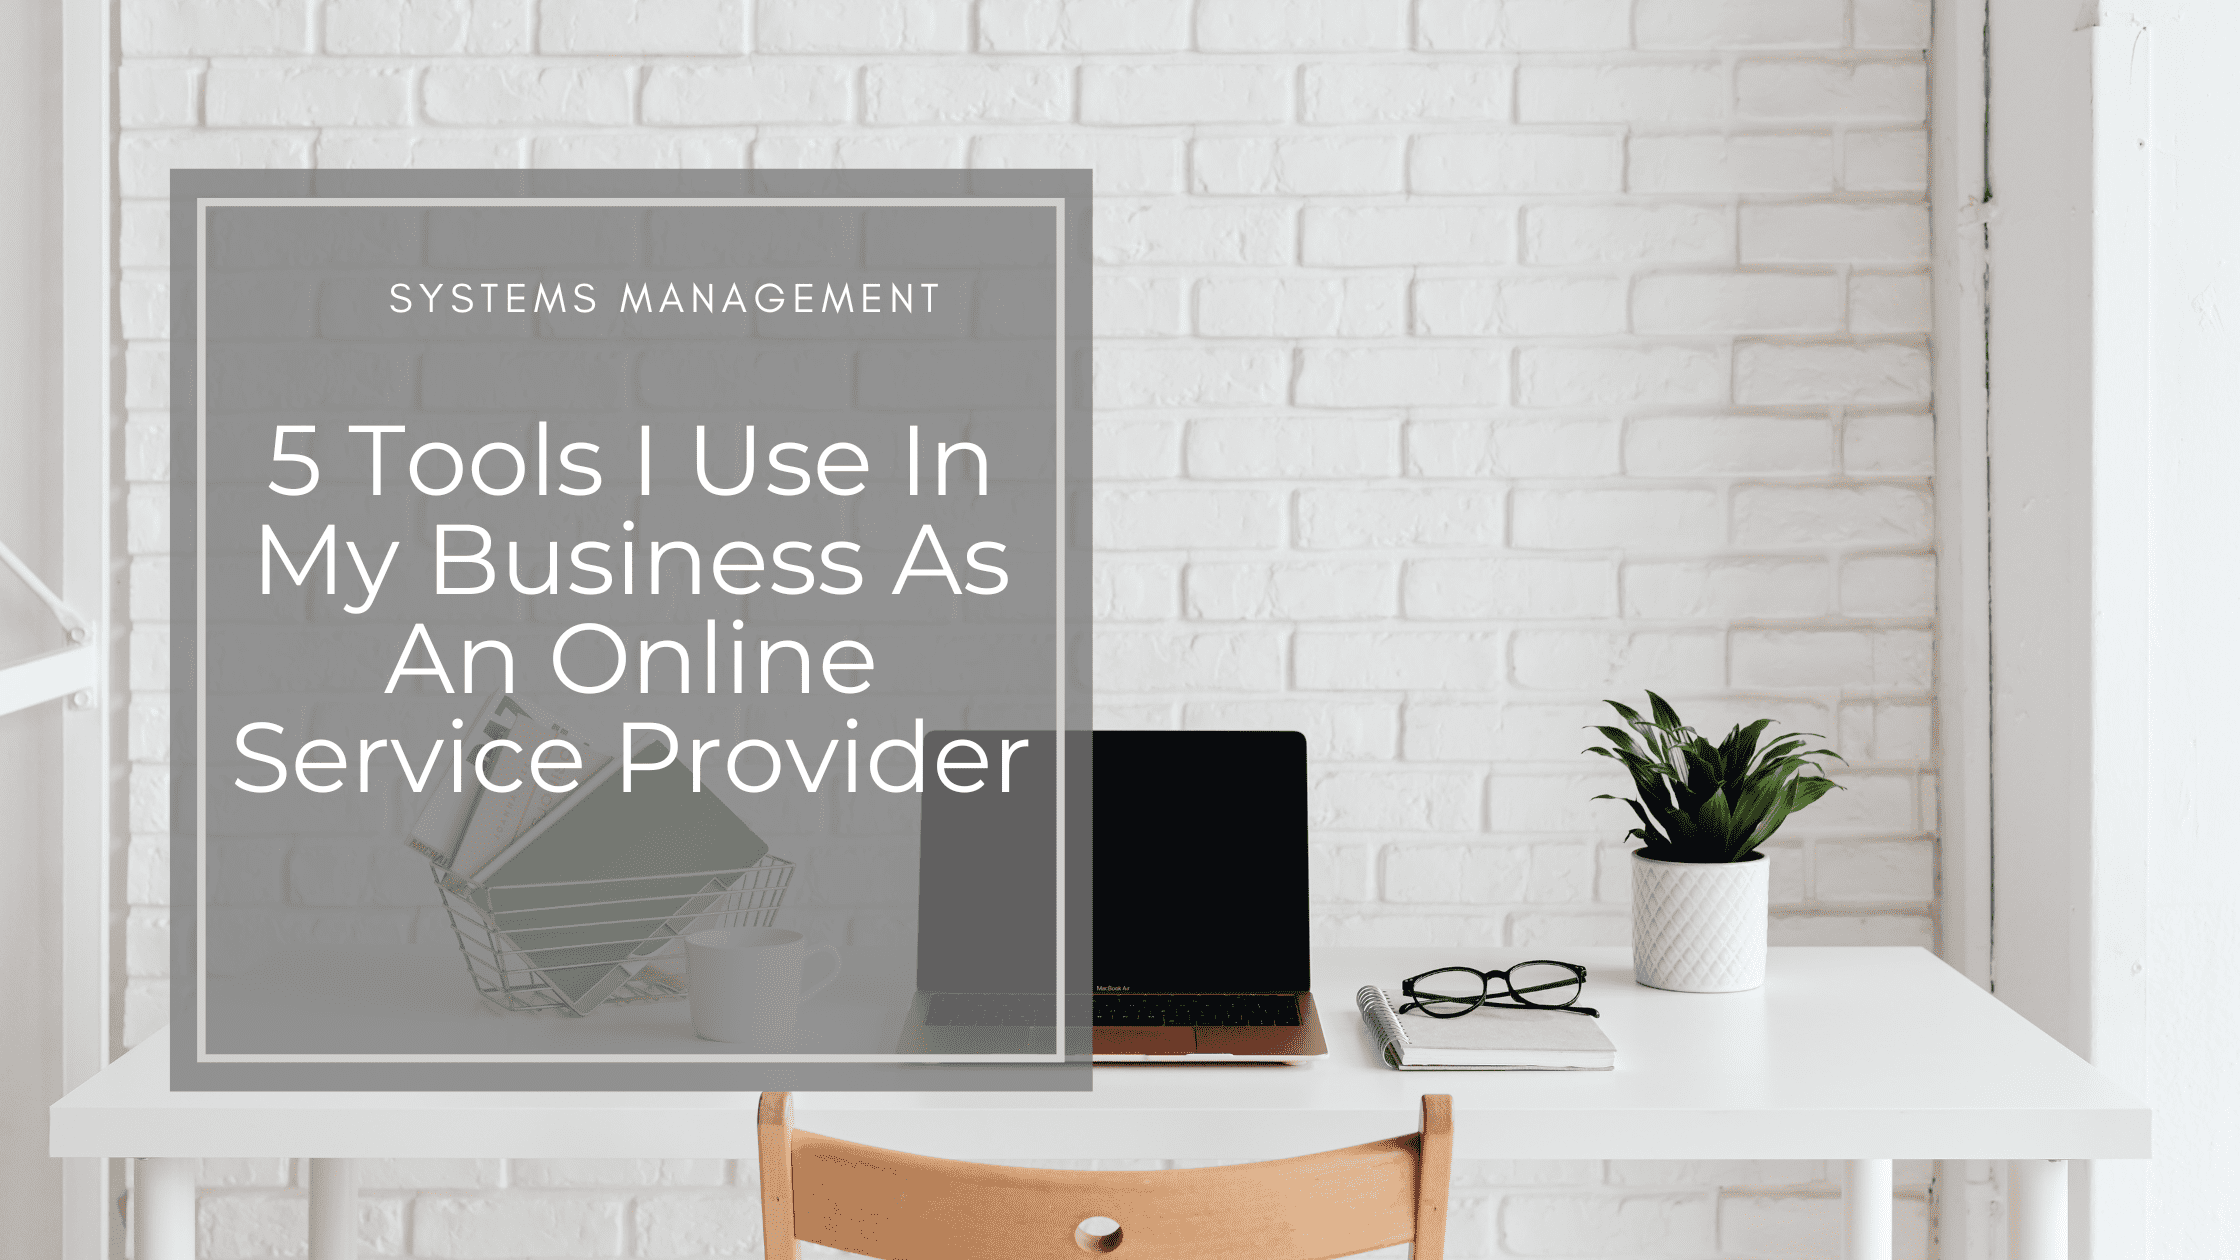 5 Tools I Use In My Business as an Online Service Provider